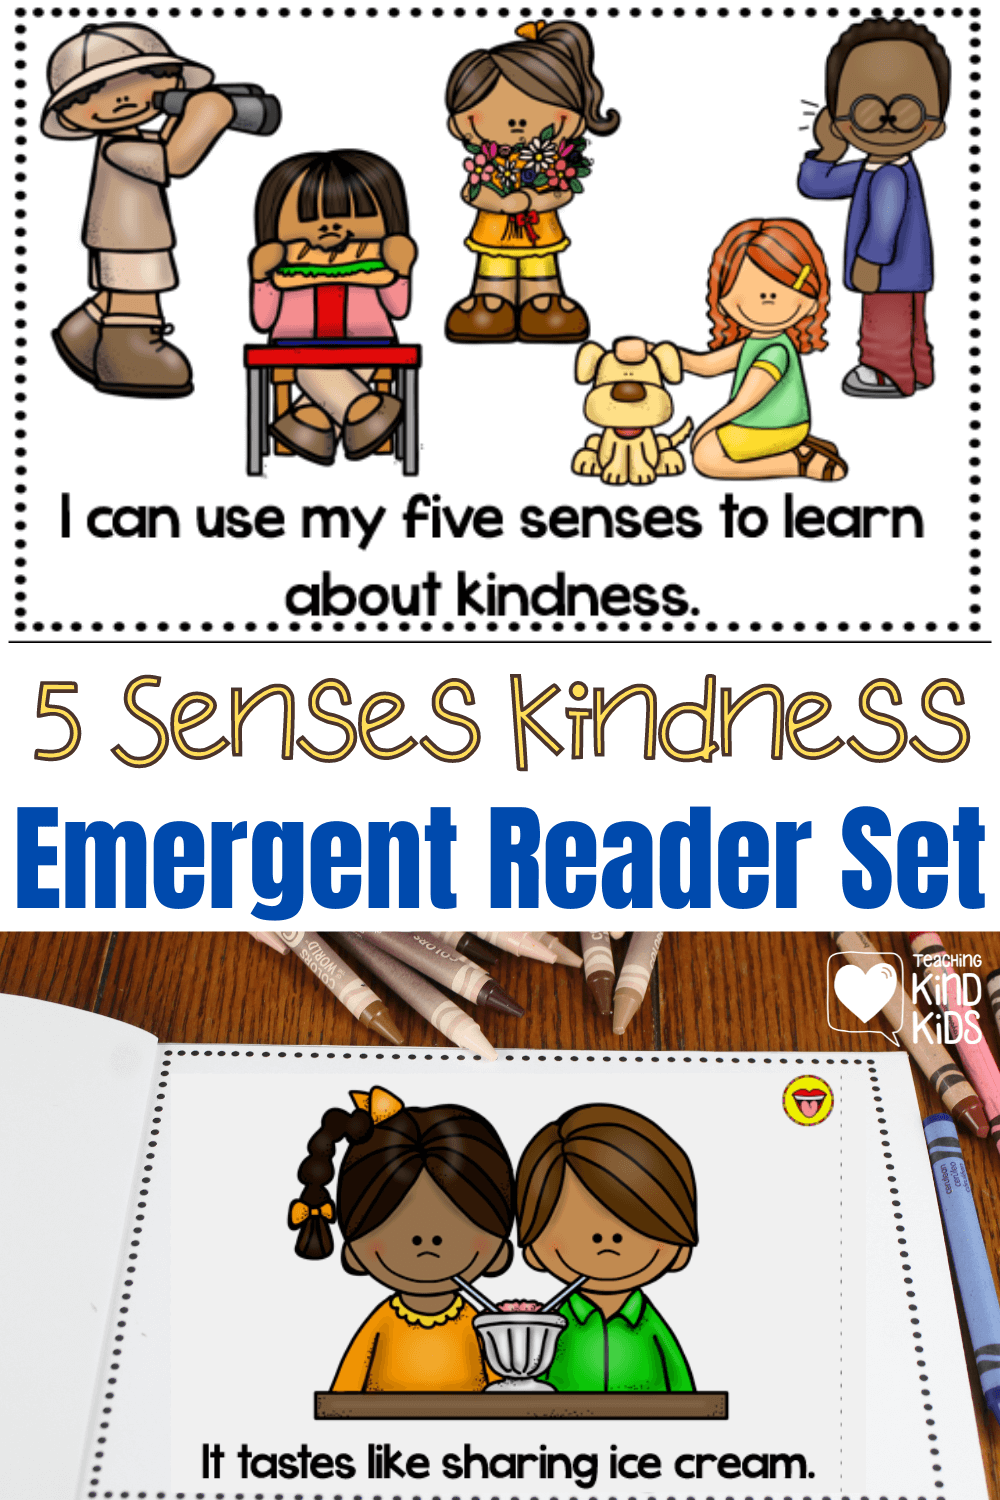 Use your five senses and learn about all the different ways to show kindness using those senses.